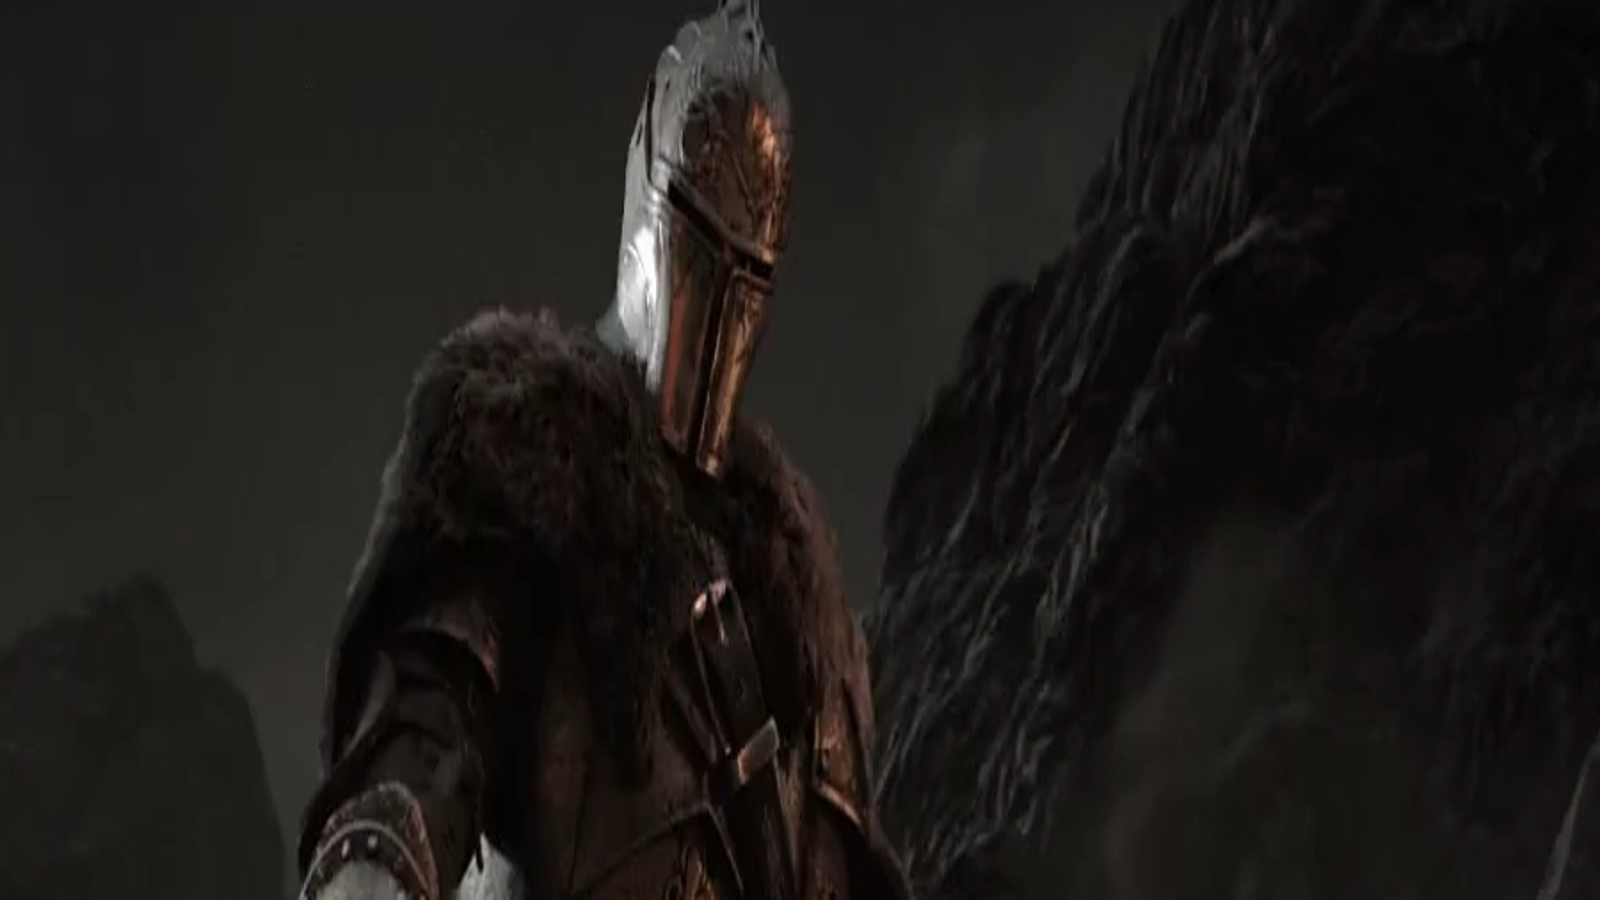 Dark Souls II Limited And Collectors Edition Get Early Access